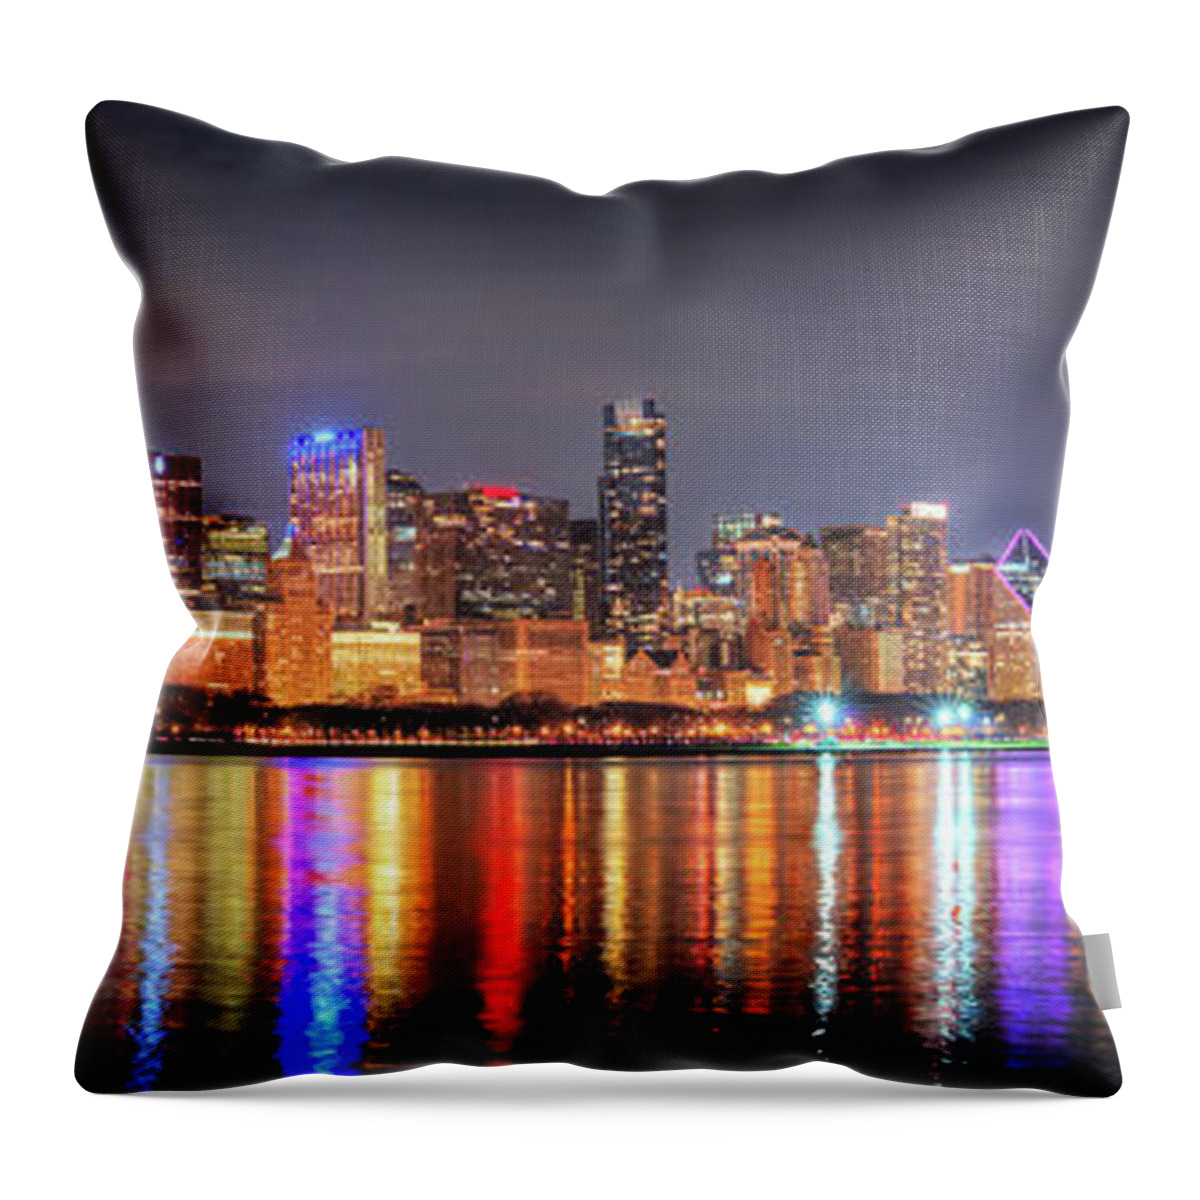 Chicago Skyline Throw Pillow featuring the photograph Chicago Skyline 2021 NIGHT Panorama by Jon Holiday